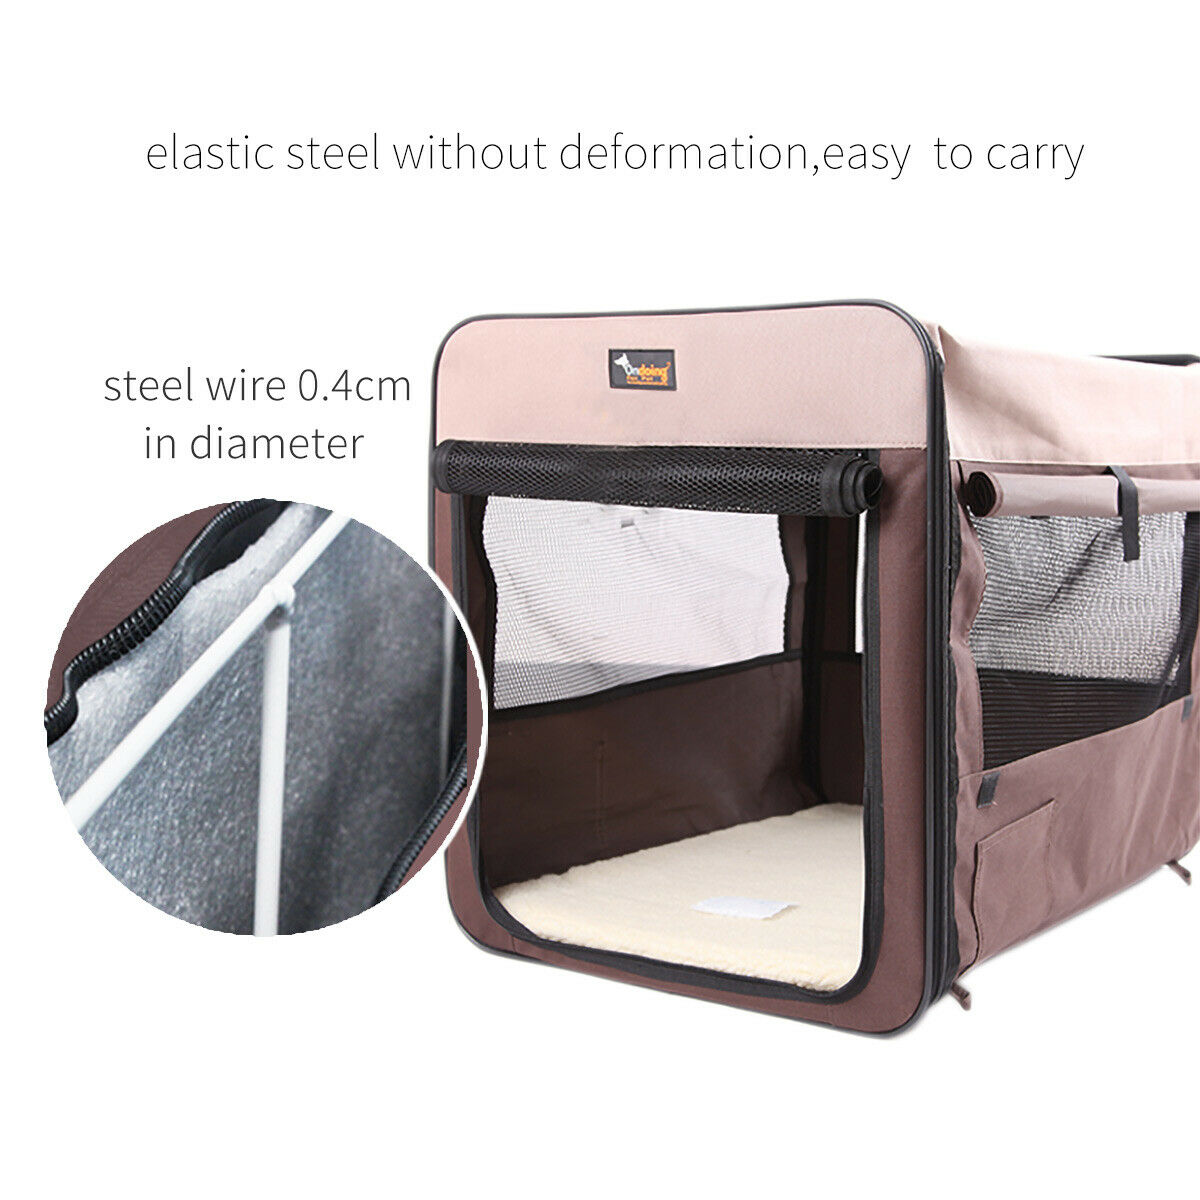 Pet Carrier Bag Soft Dog Crate Cage Kennel Tent House Foldable Portable Car Bed Grey 82*58*58CM